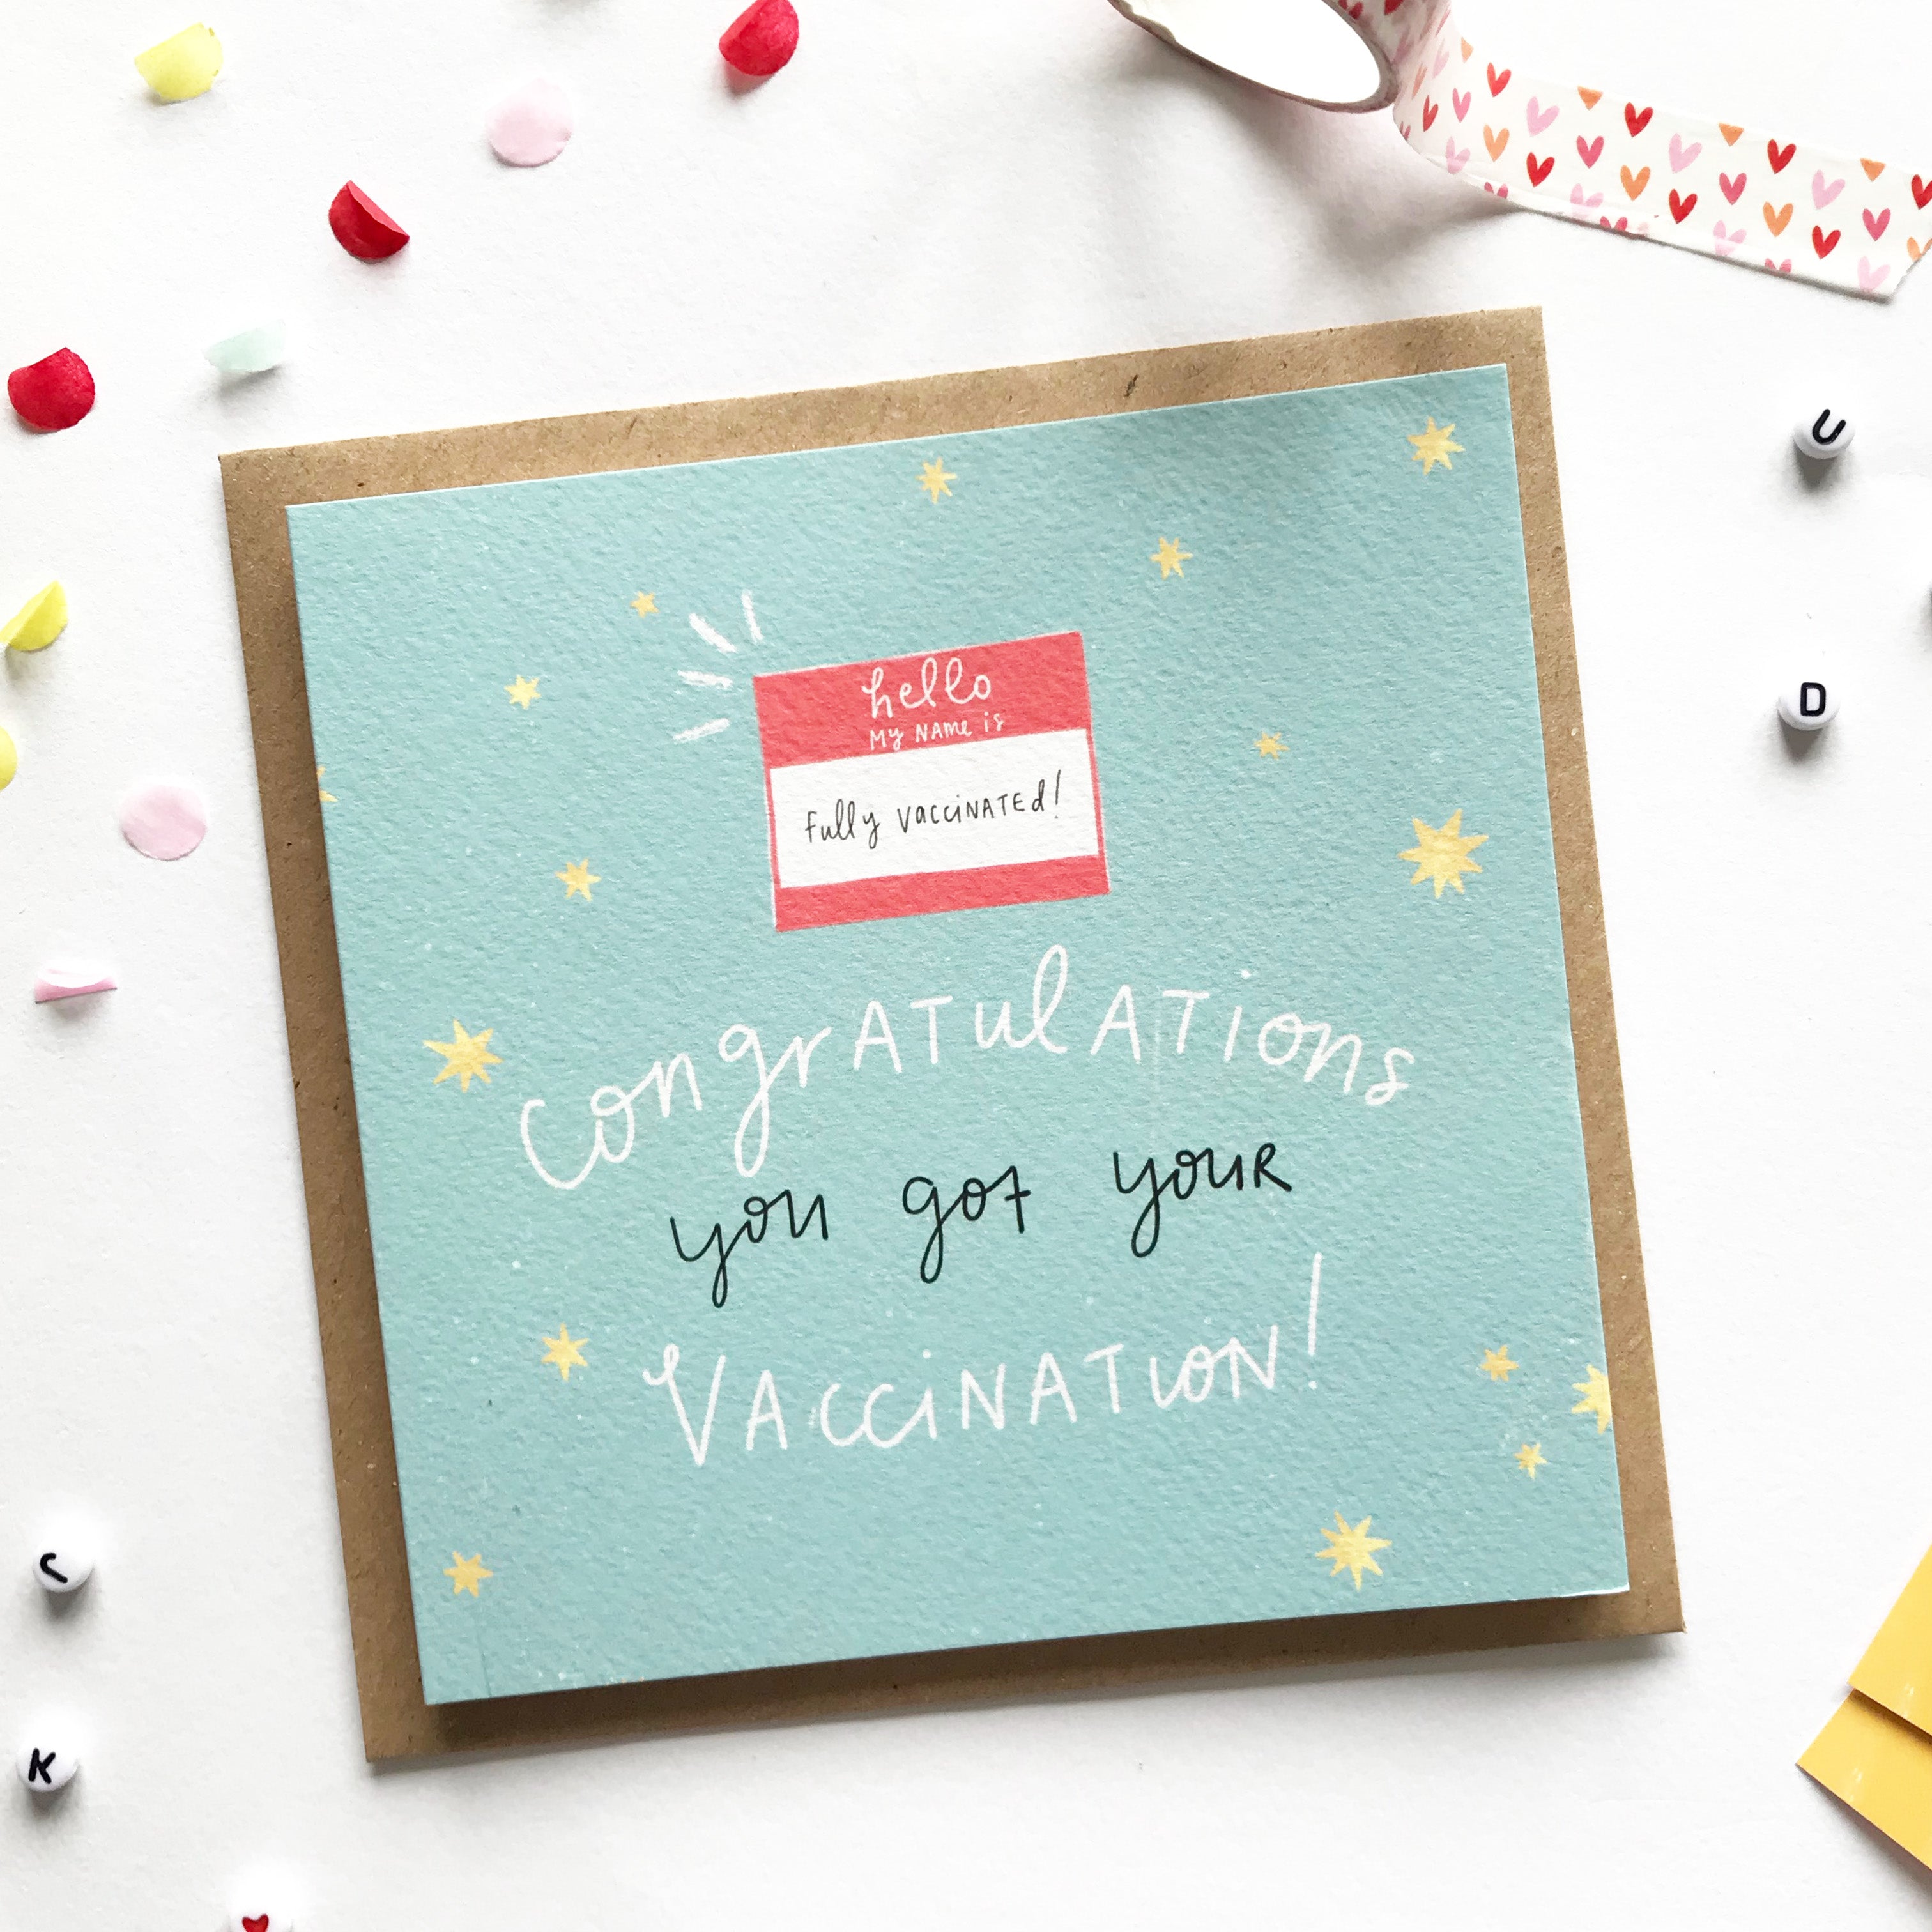 Congratulations - you got your vaccination!